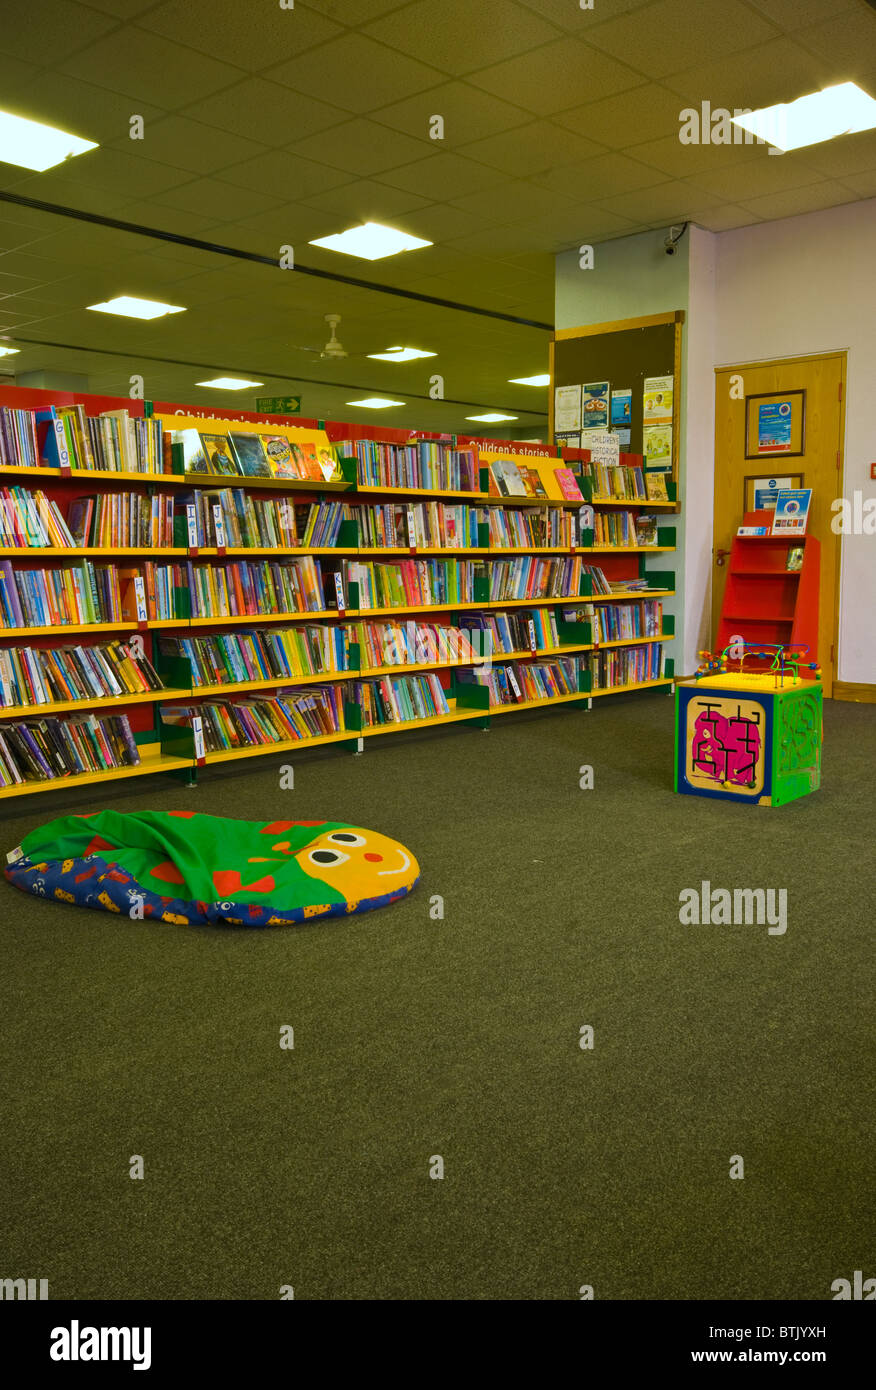 Childrens Section In A Public Library Stock Photo